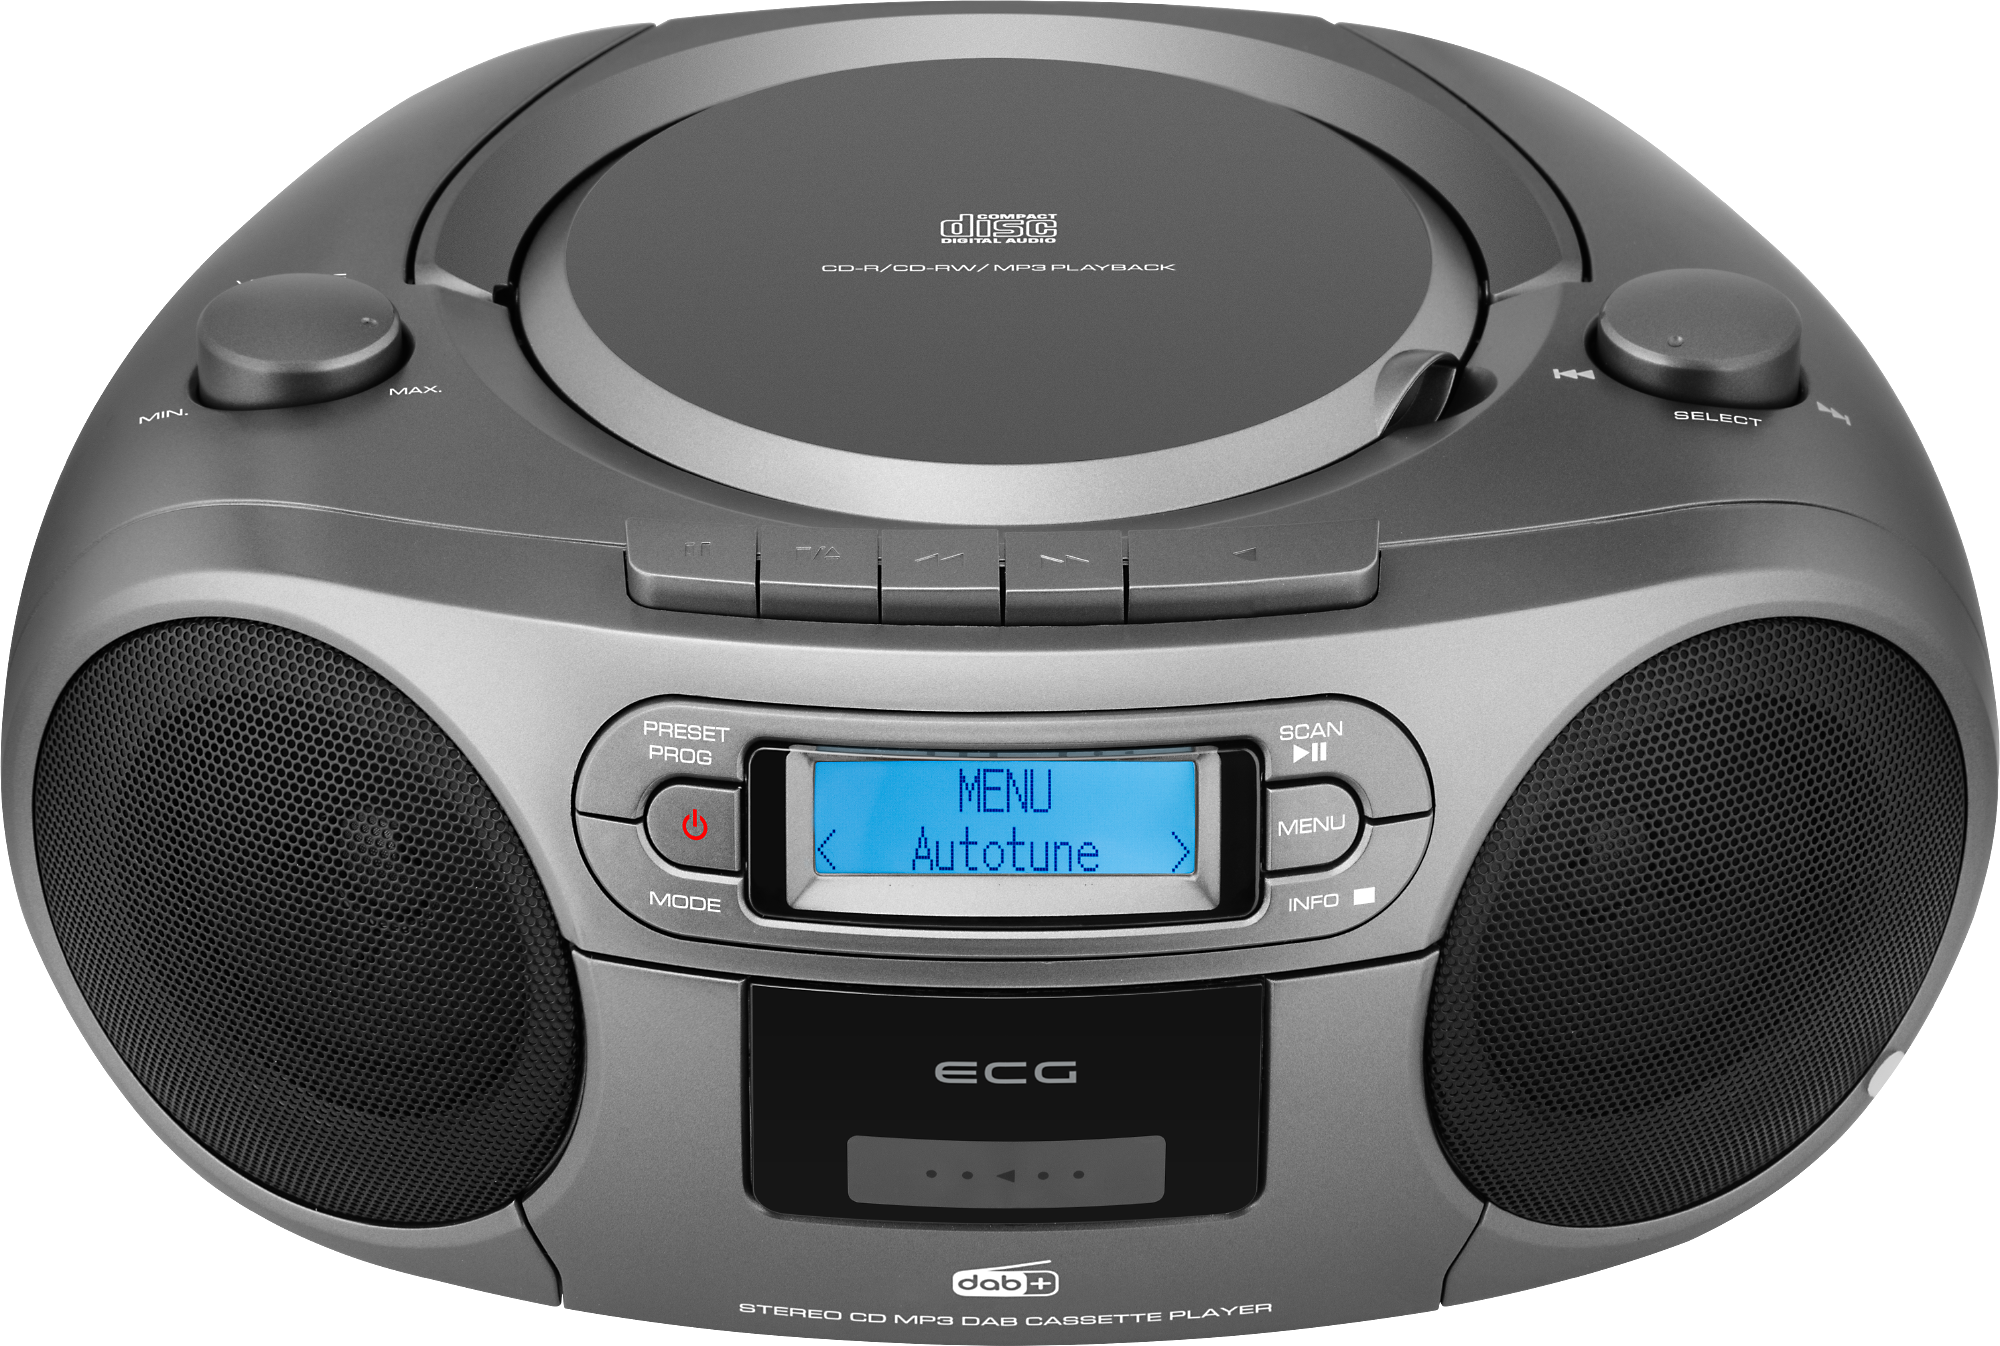 Portable CD/MP3/DAB & Cassette Player with USB and PLL FM radio